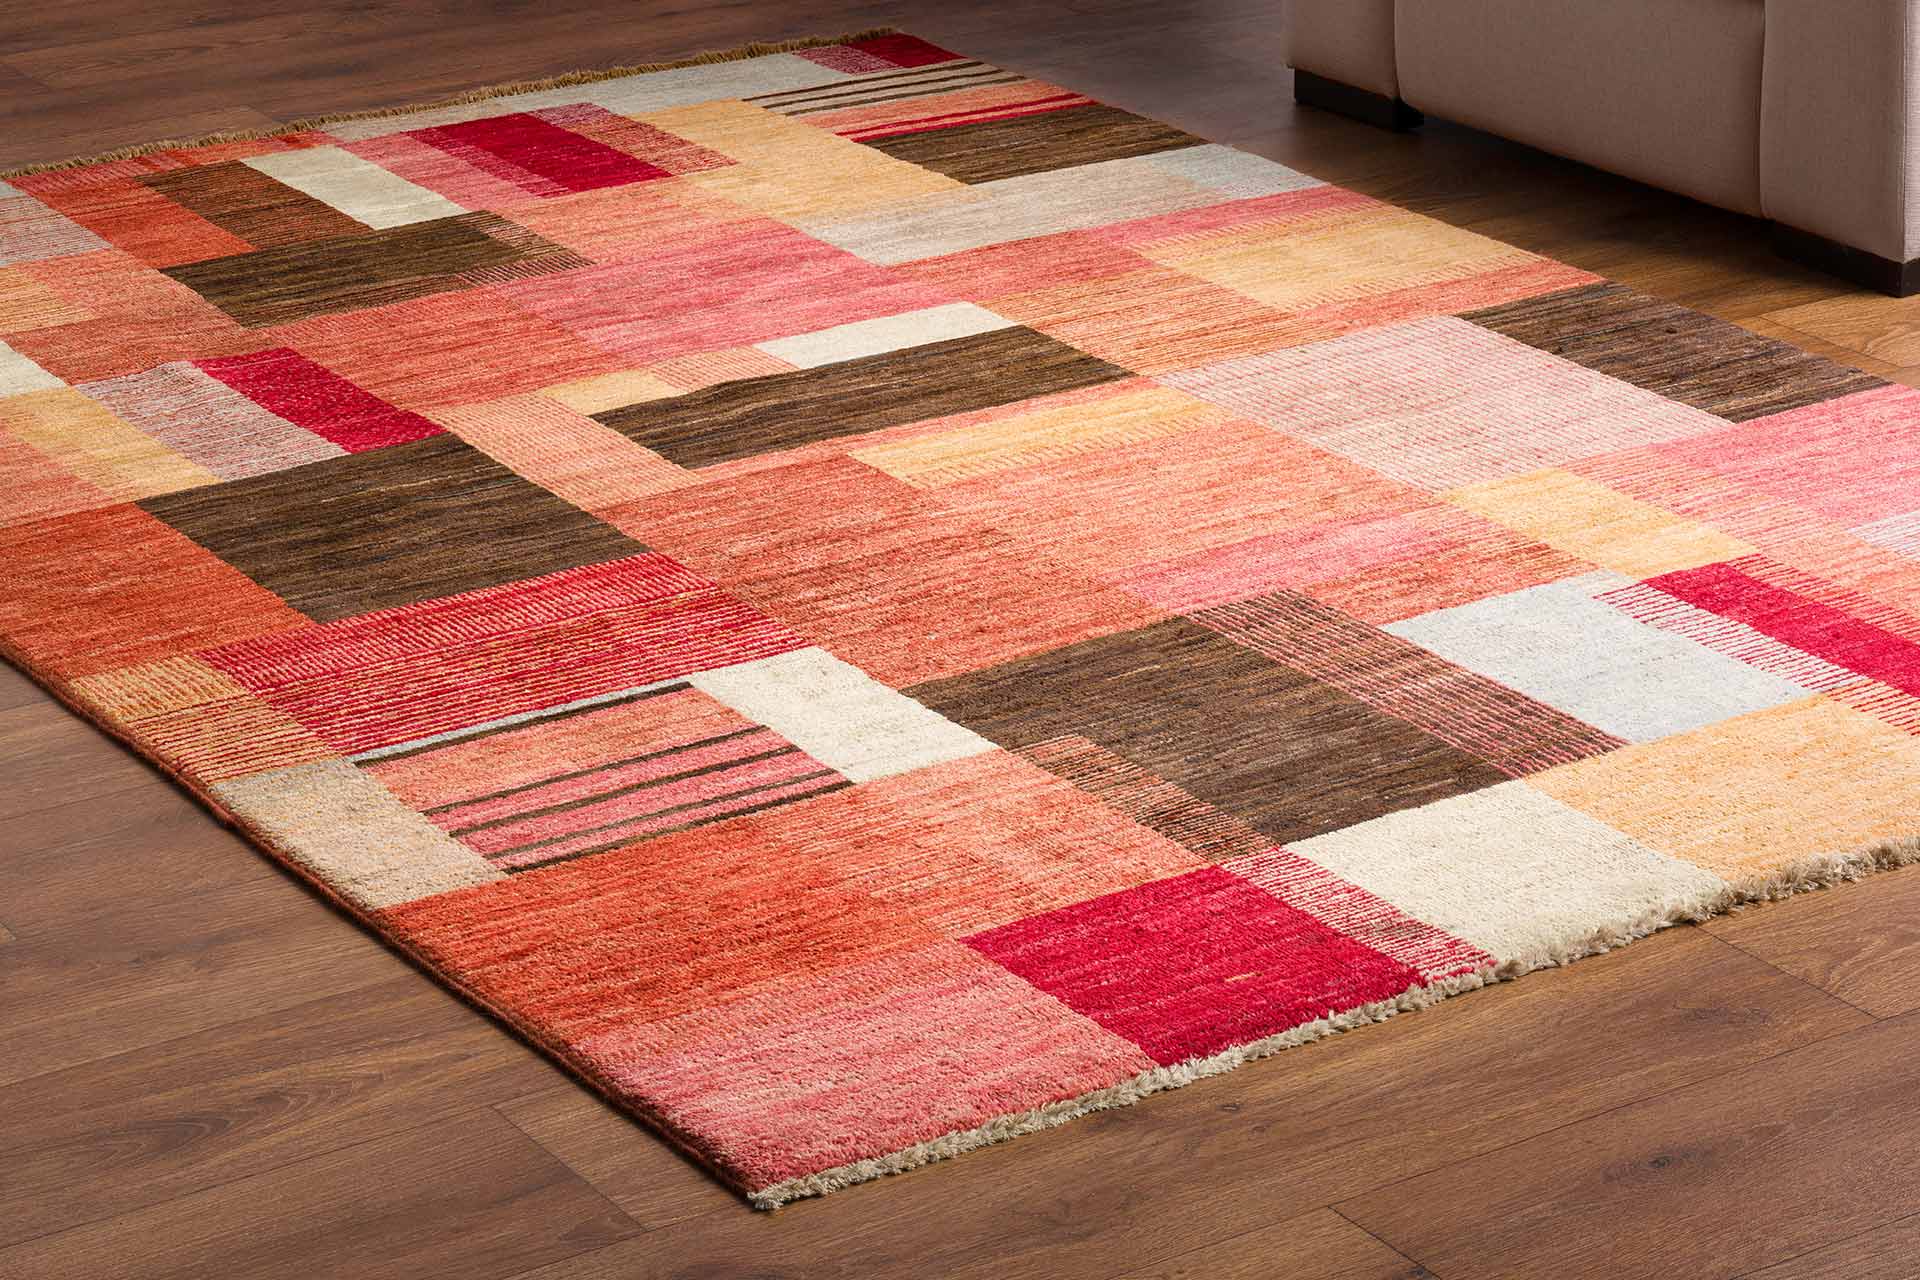 Rugs For Sale in Rochdale | Buy Rugs Online | Lifestyle Carpets